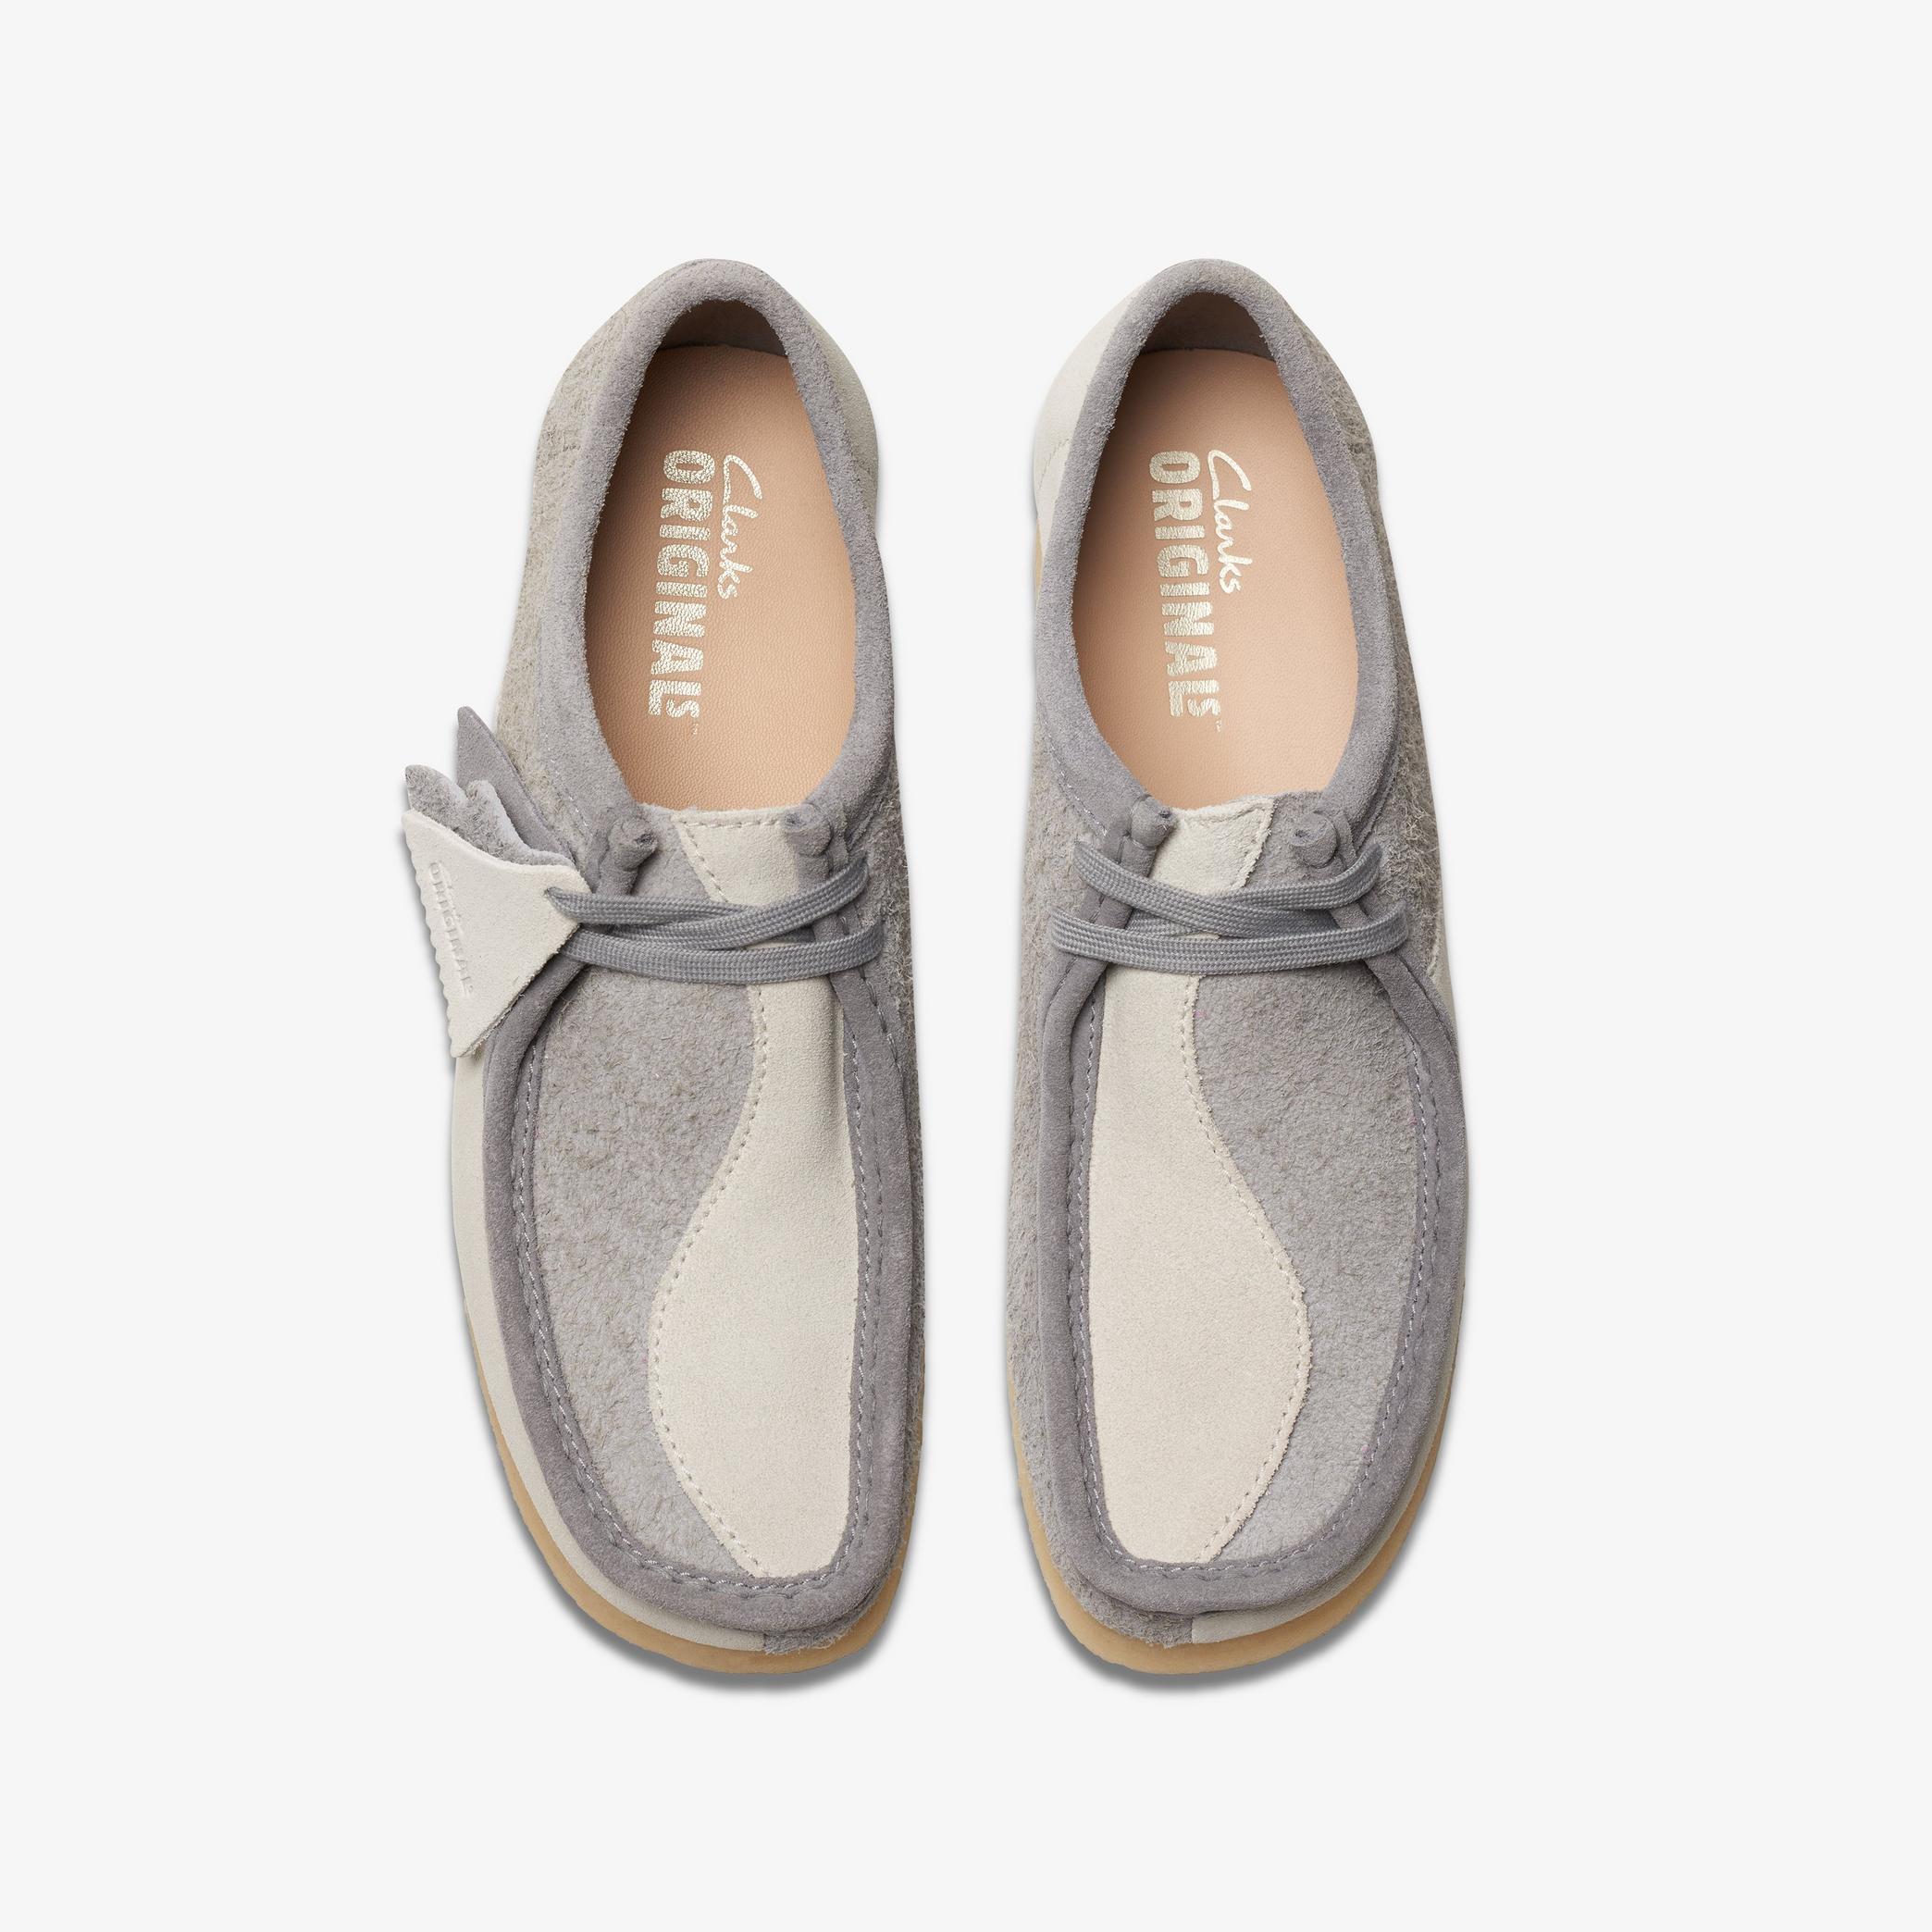 Wallabee Grey/Off White Wallabee, view 6 of 7